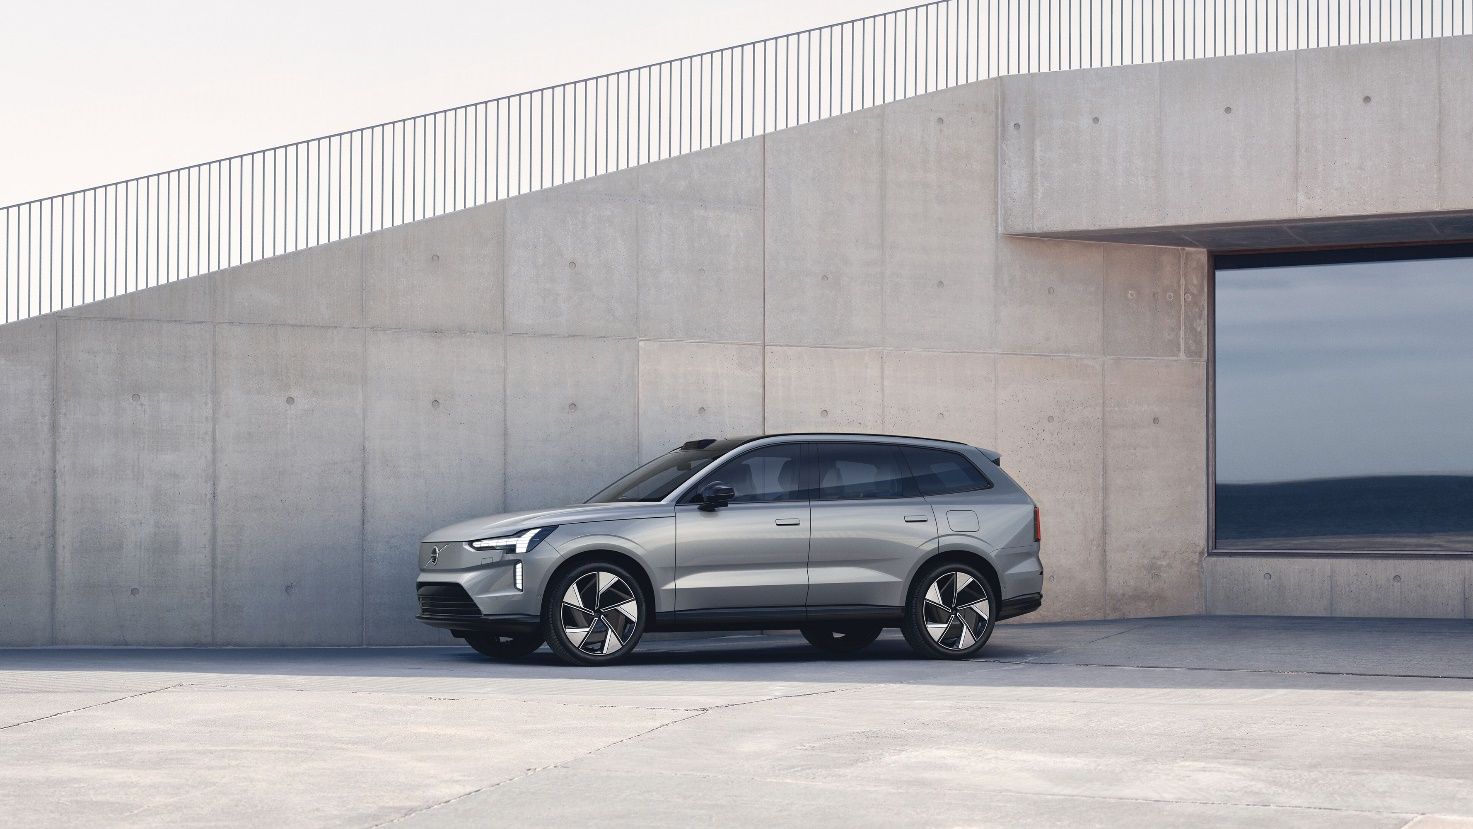 Volvo Cars has released its 2022 full-year performance report, which highlights strong performance in pure electric and Recharge vehicles, and continued acceleration of its electrification transformation.